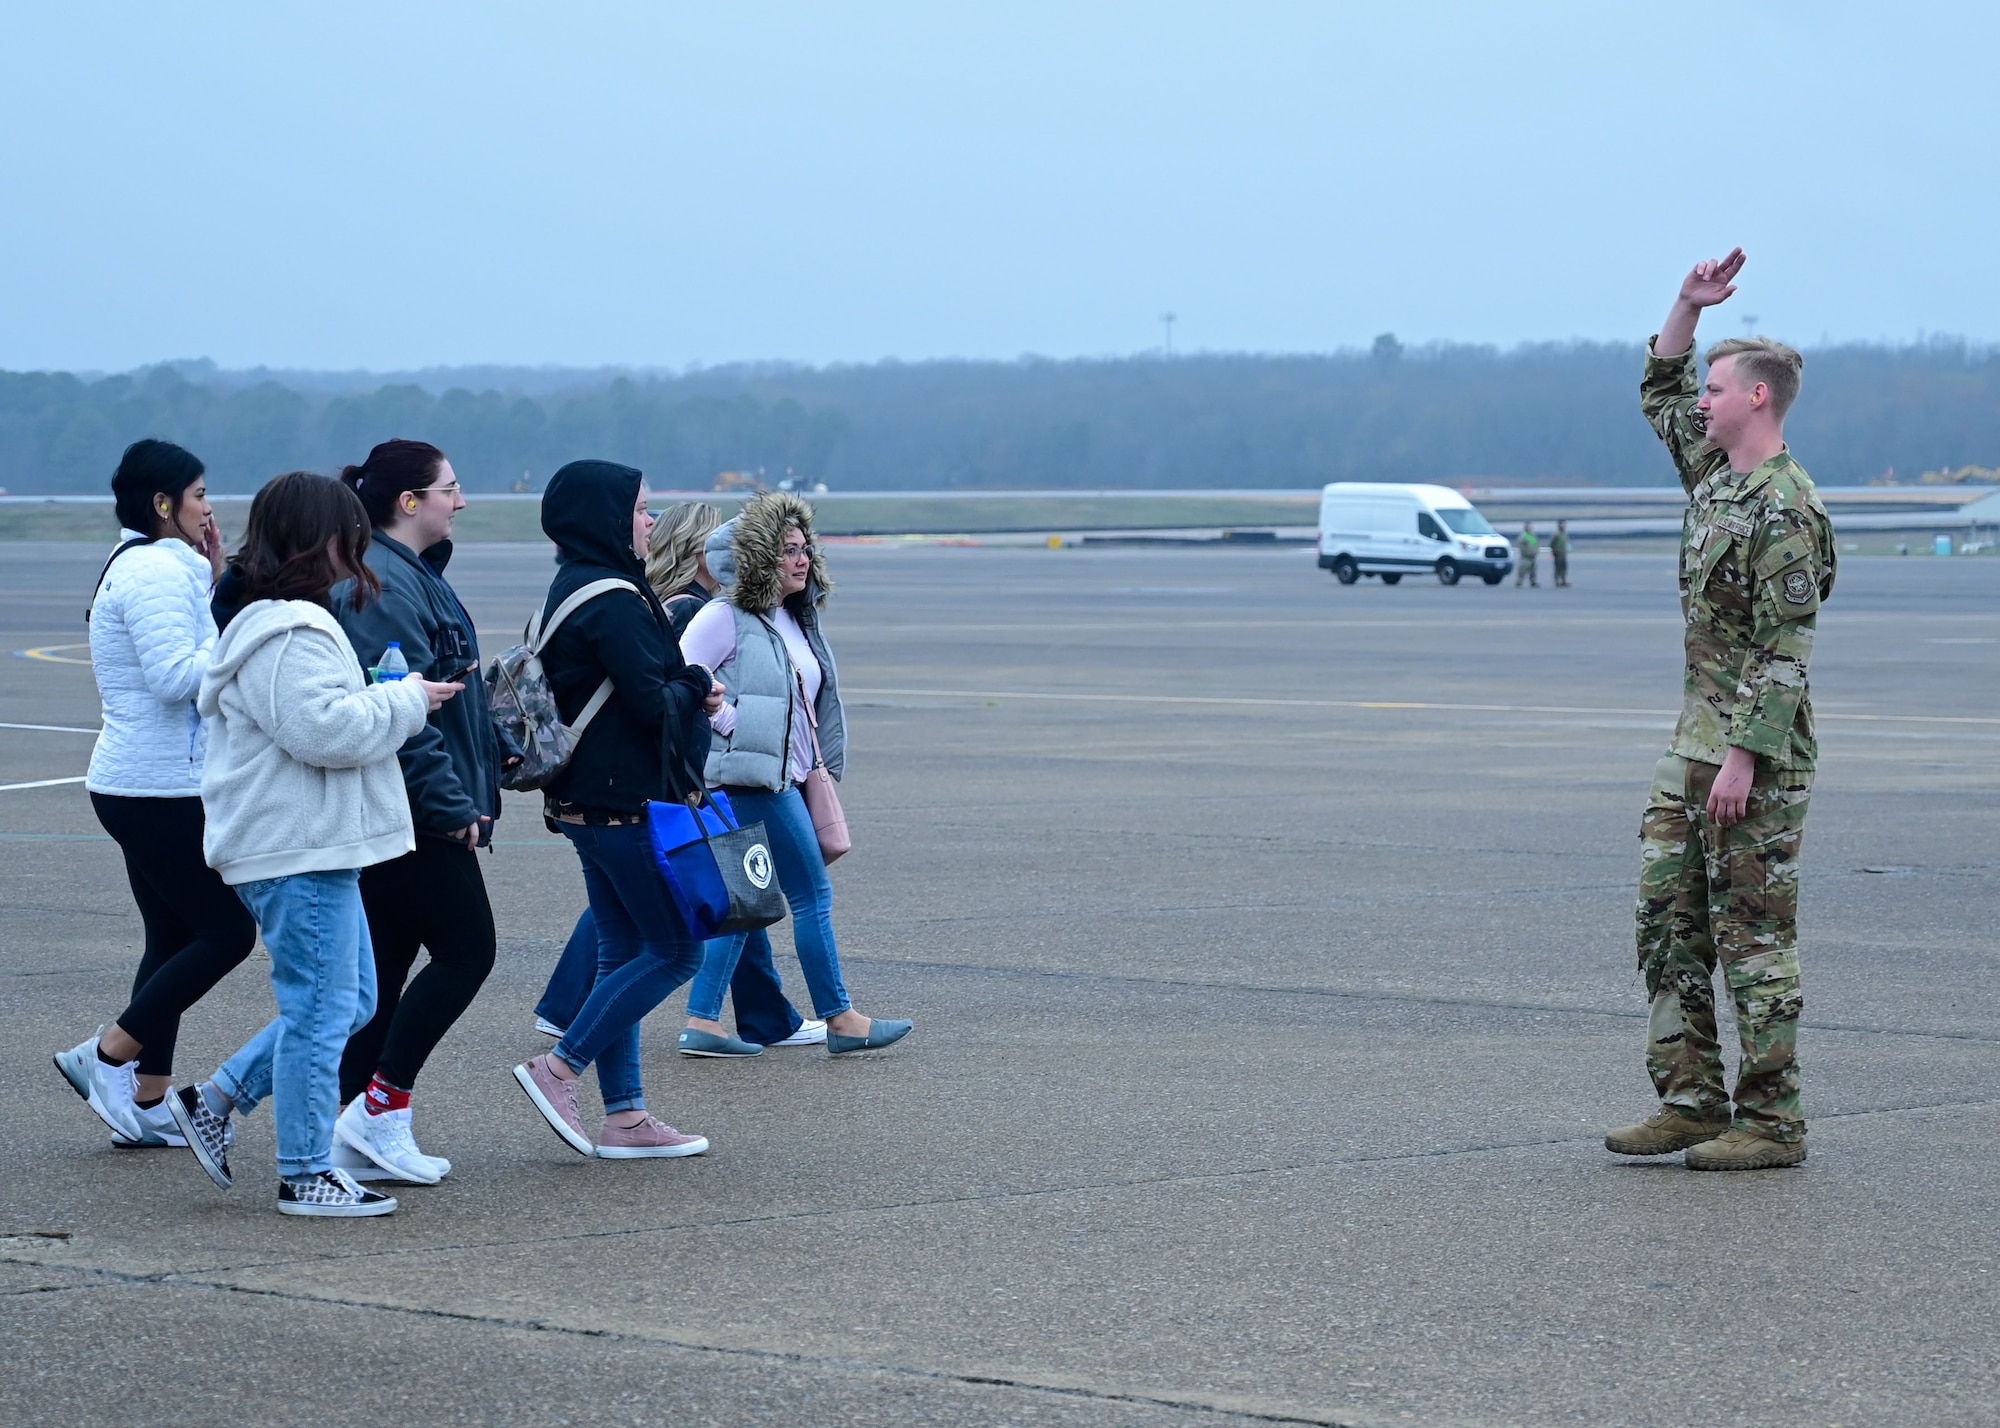 A loadmaster directs families on airfield